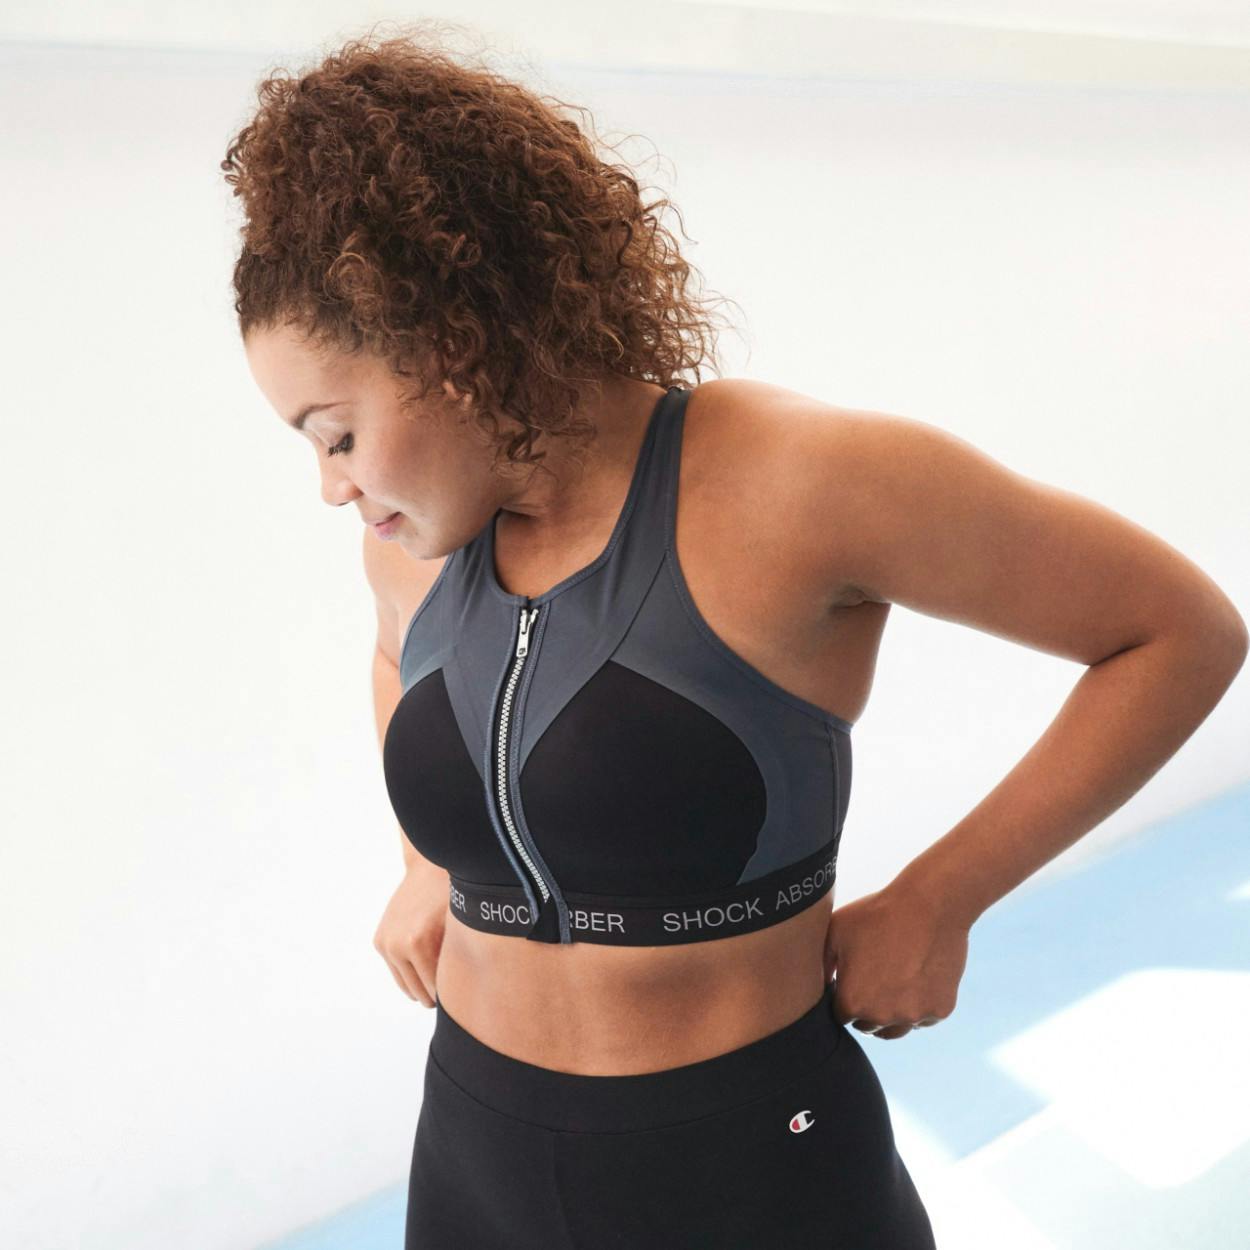 How to Choose a Sports Bra - our Guide